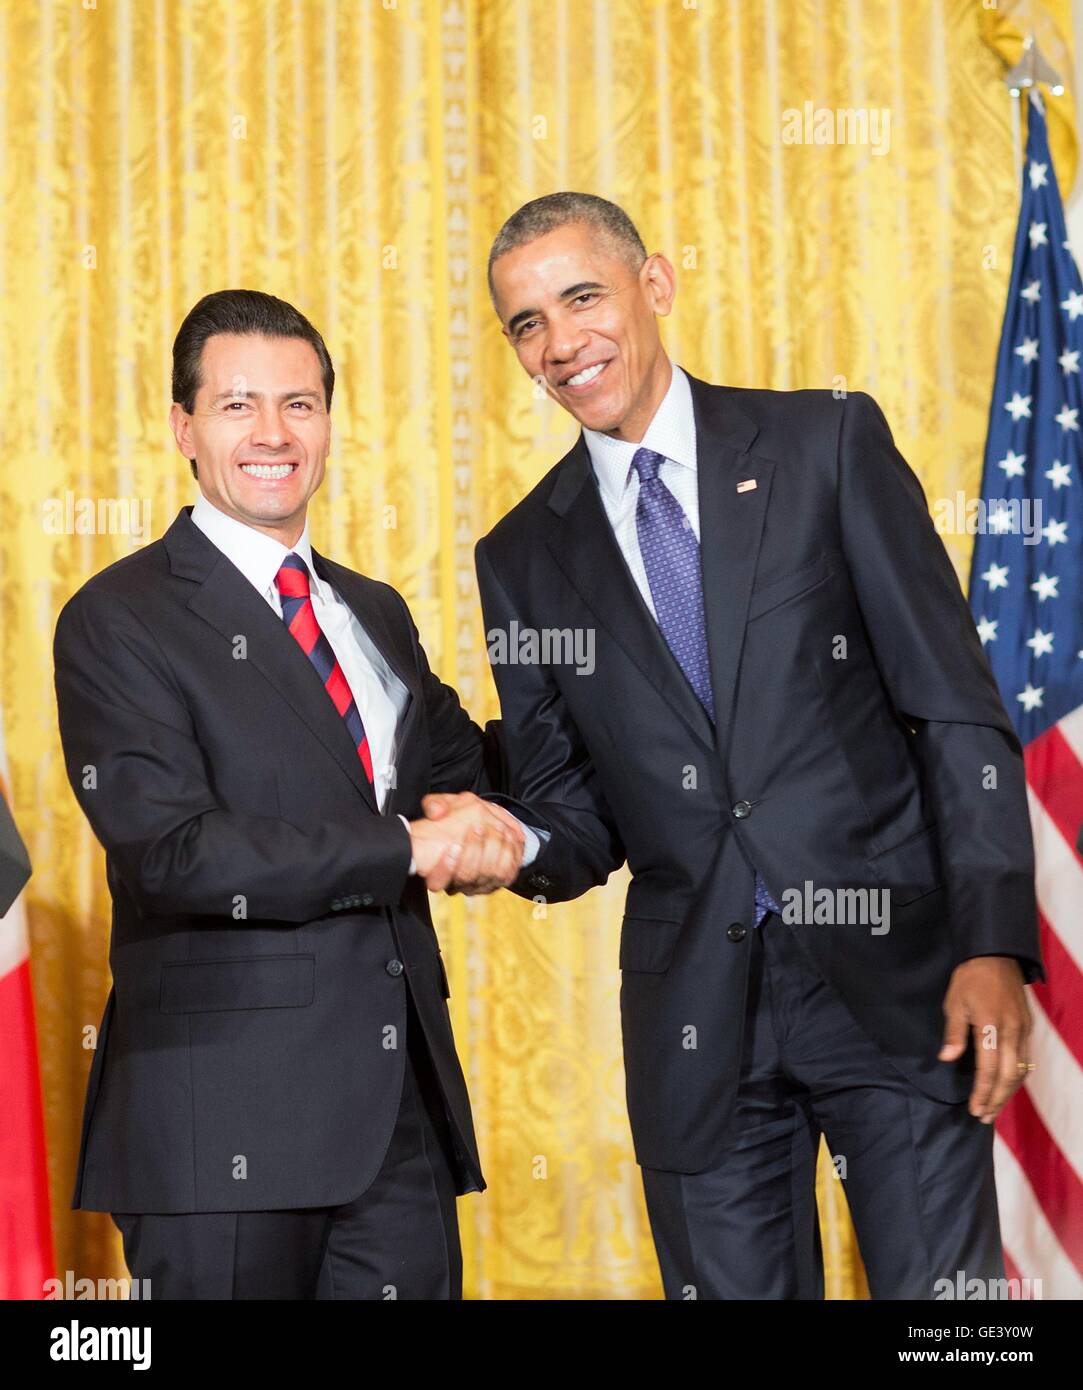 U.S President Barack Obama shakes hands with Mexican President Enrique Pena Nieto following their joint press conference in the East Room of the White House July 22, 2016 in Washington, DC. Stock Photo